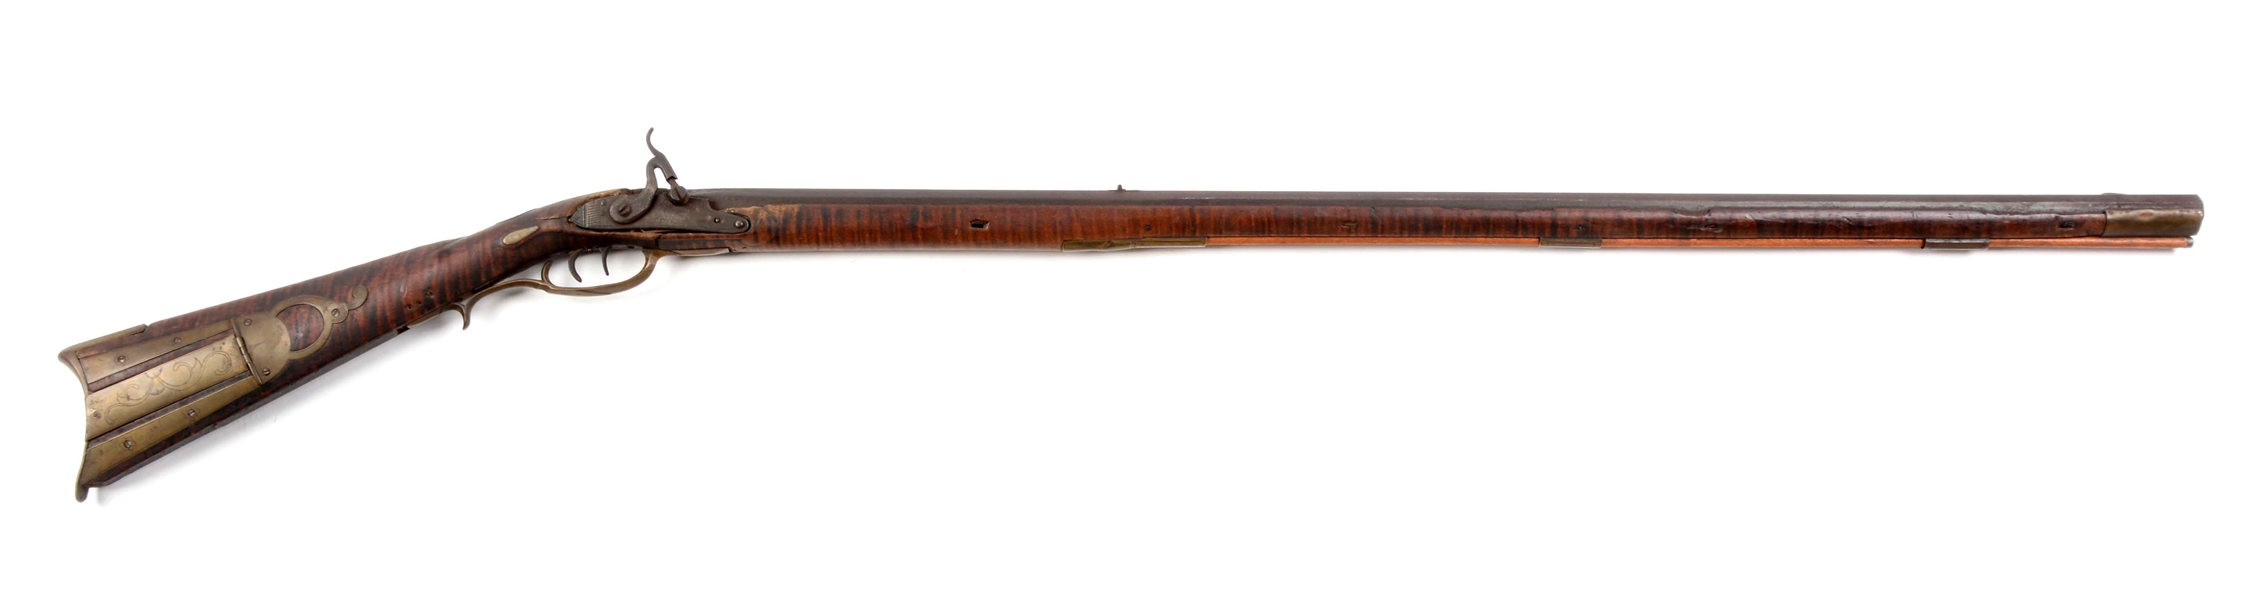 (A) BEDFORD CO. PERCUSSION LONG RIFLE BY JOHN AMOS